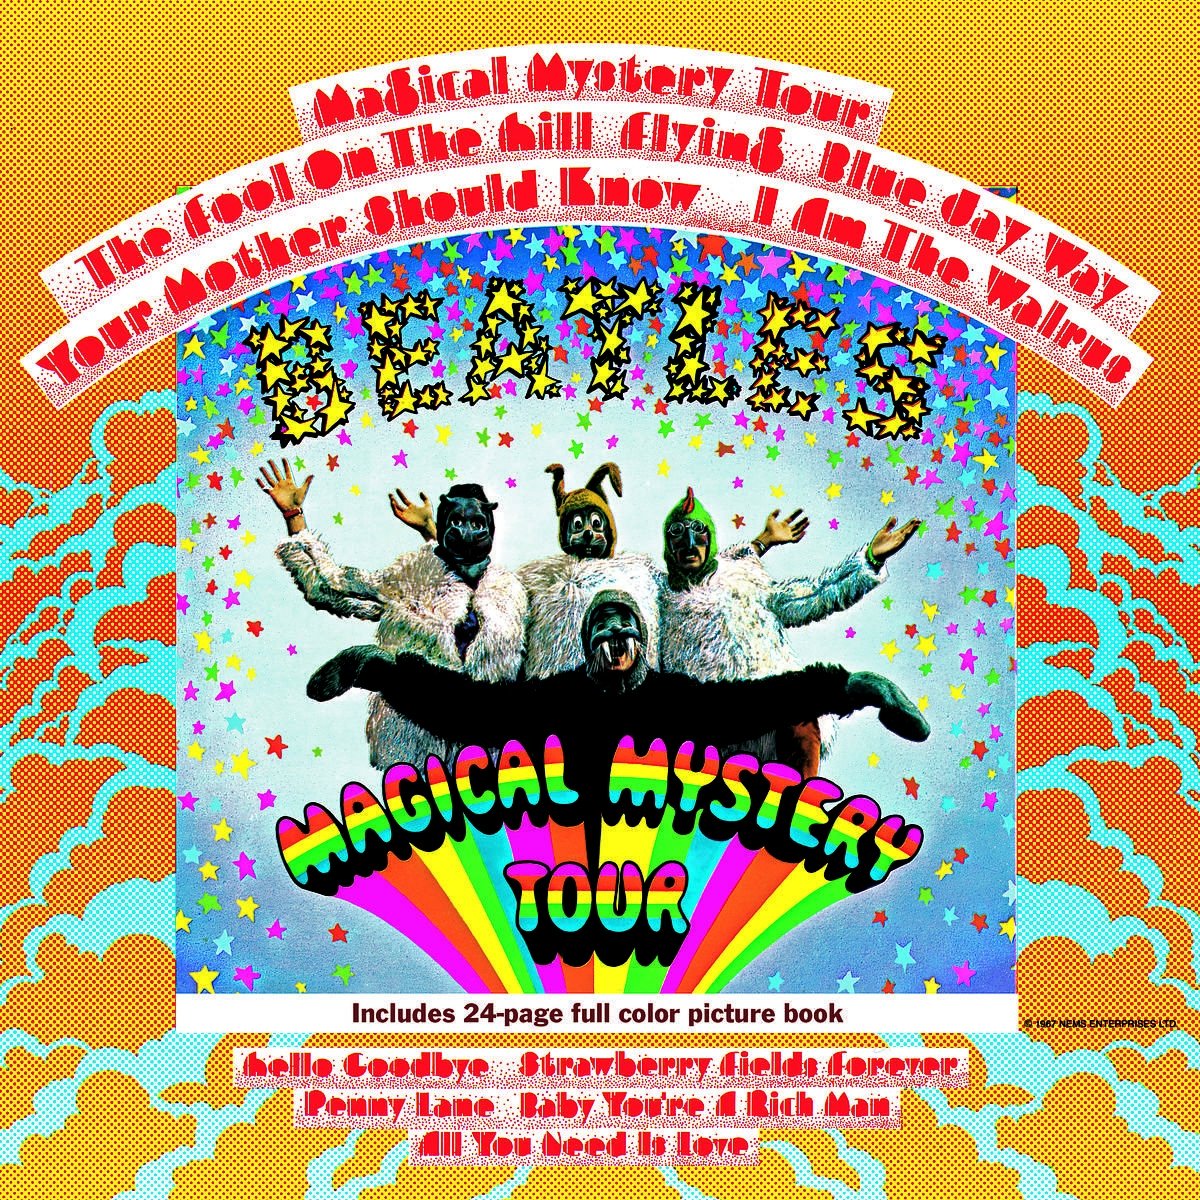 BEATLES, THE - MAGICAL MYSTERY TOUR - LP